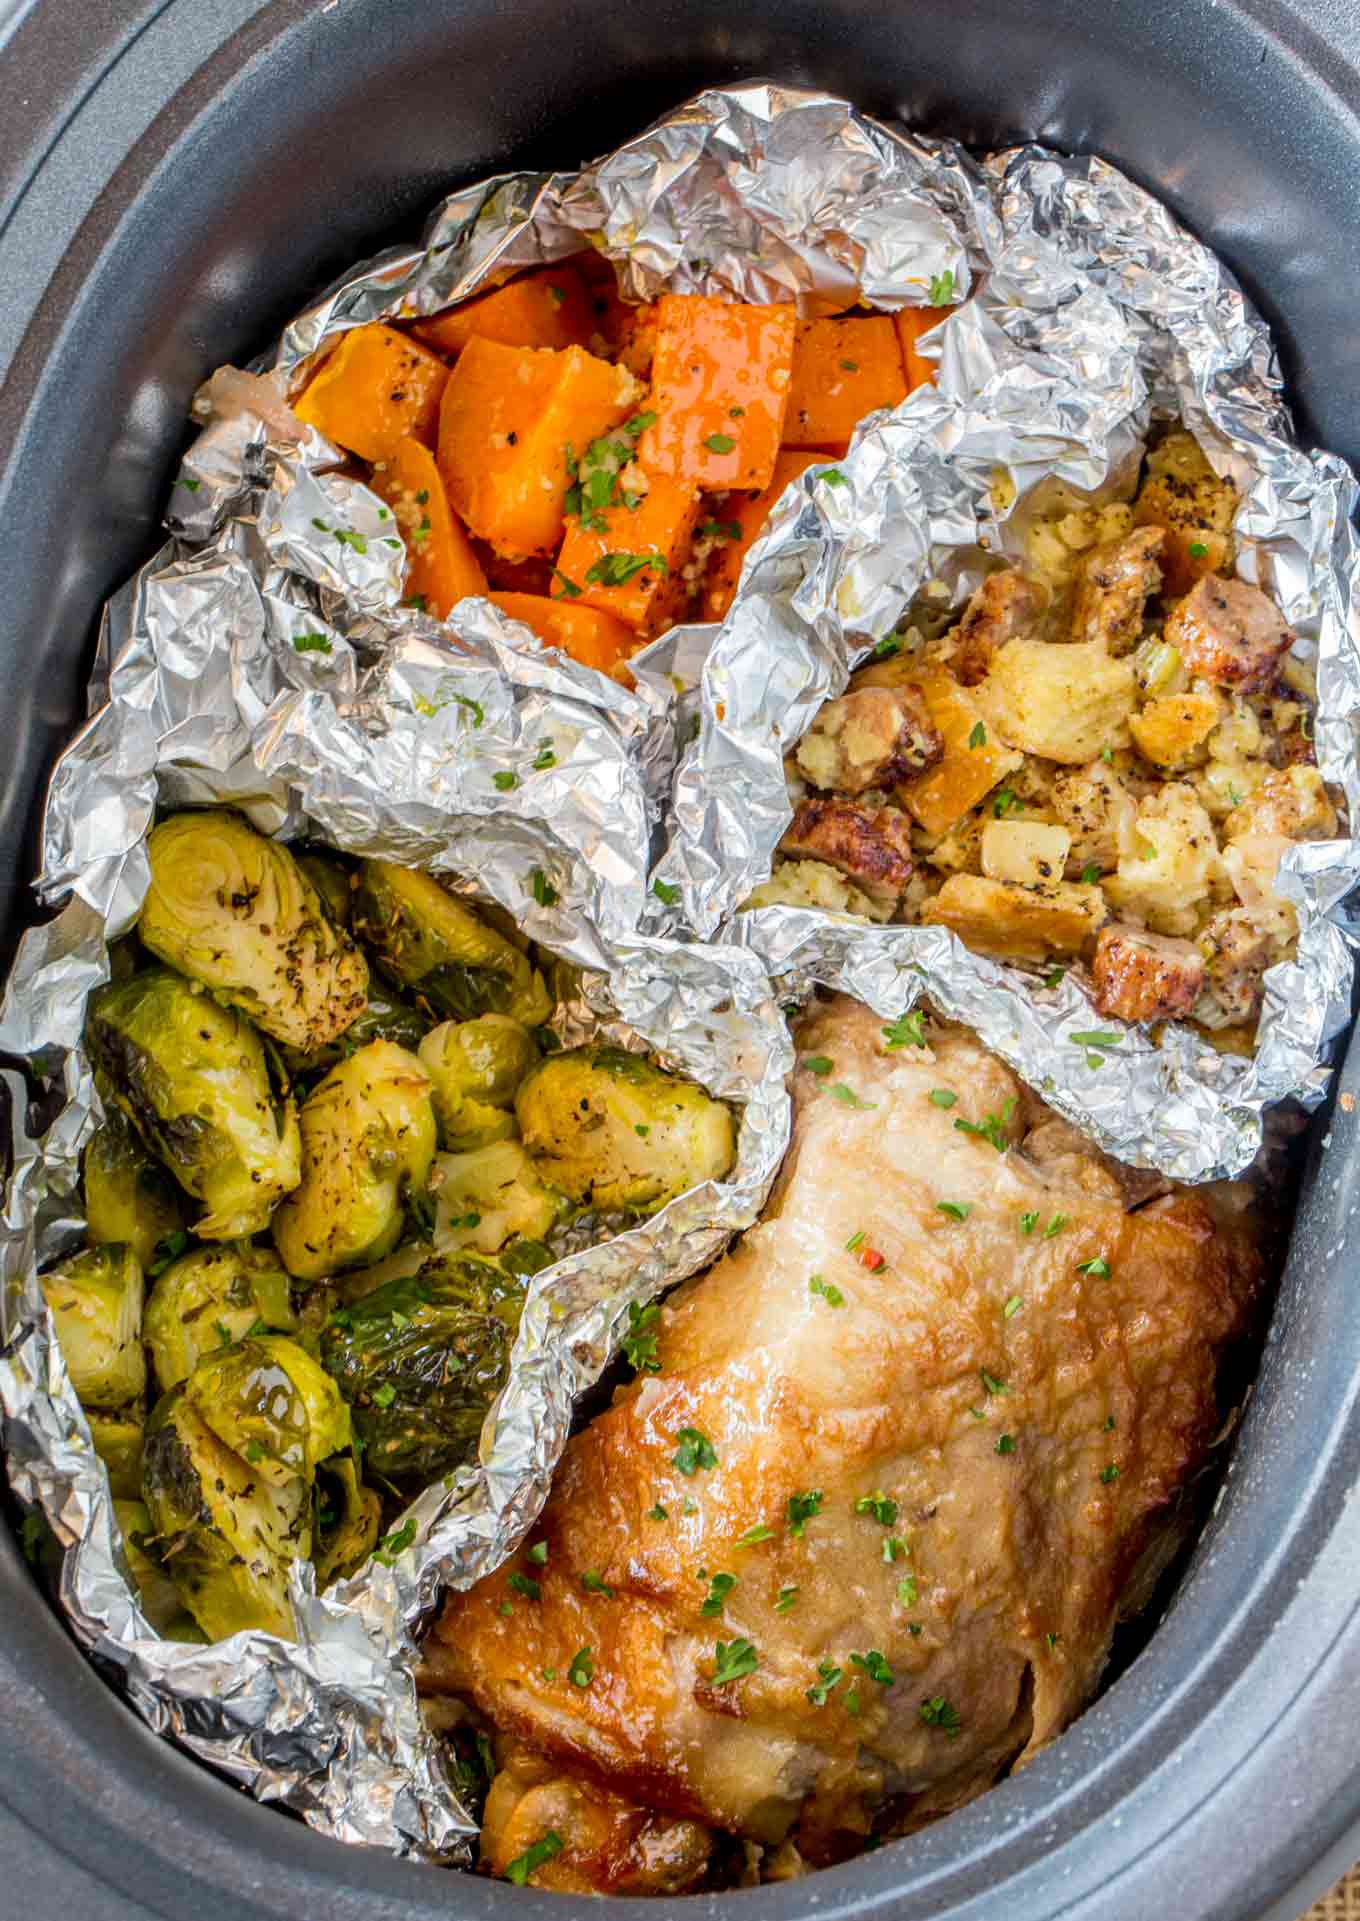 Slow Cooker Thanksgiving Dinner with turkey, sweet potatoes, sausage stuffing and Brussels Sprouts cooked entirely in your Slow Cooker!